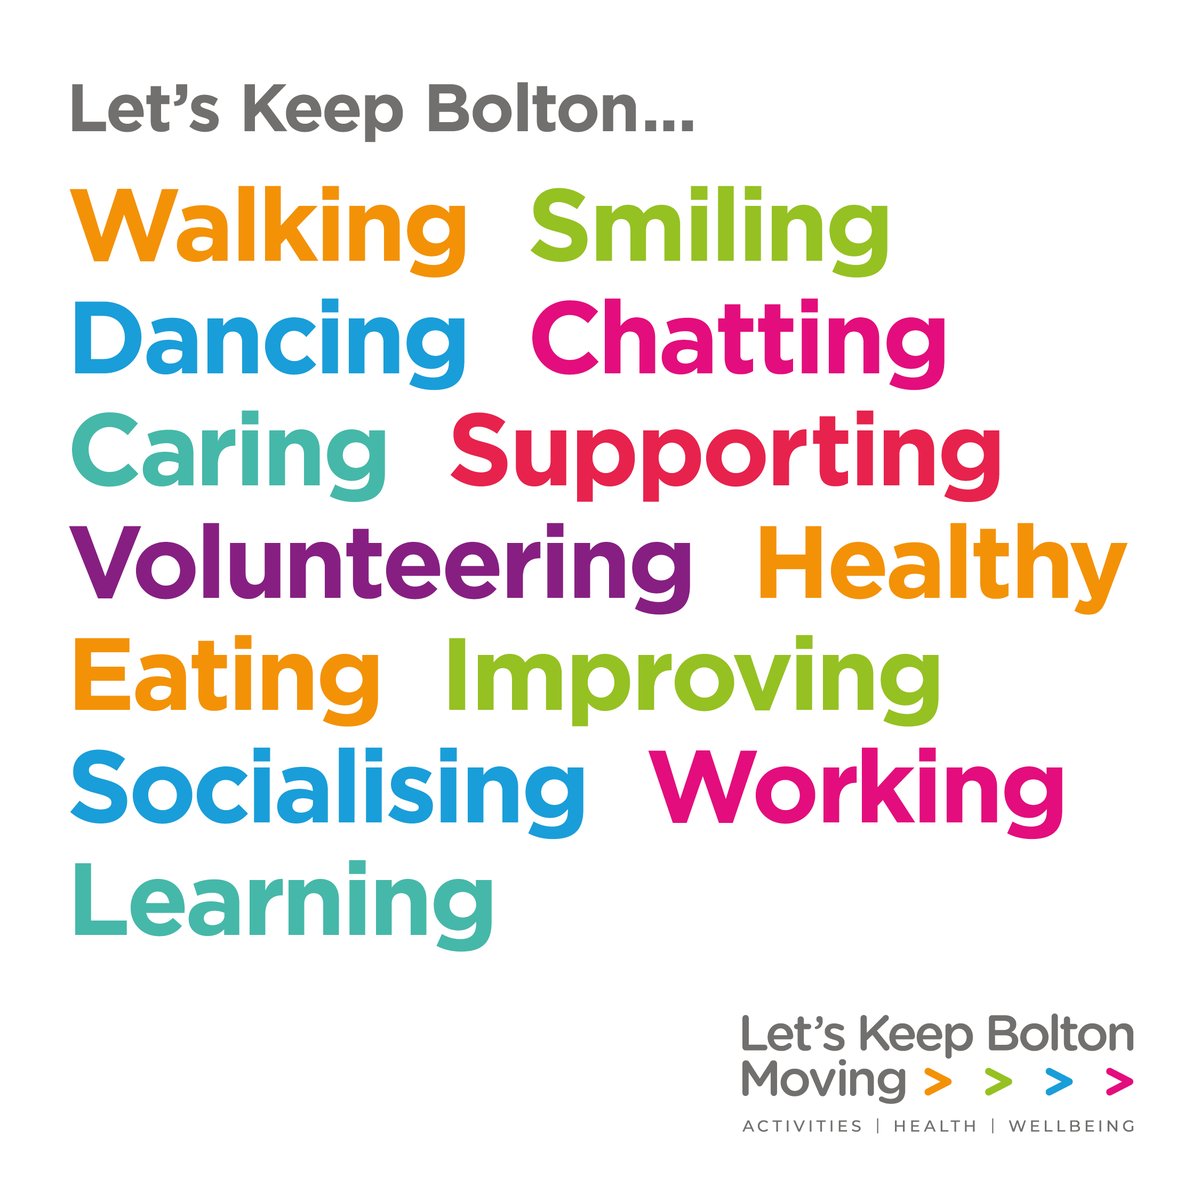 Get active, sleep better. Physical activity releases feel-good hormones called endorphins, which help us sleep better. The better we sleep, the better our energy levels, mood and ability to concentrate. Sound good? Make the move to a more active you, visit letskeepboltonmoving.co.uk